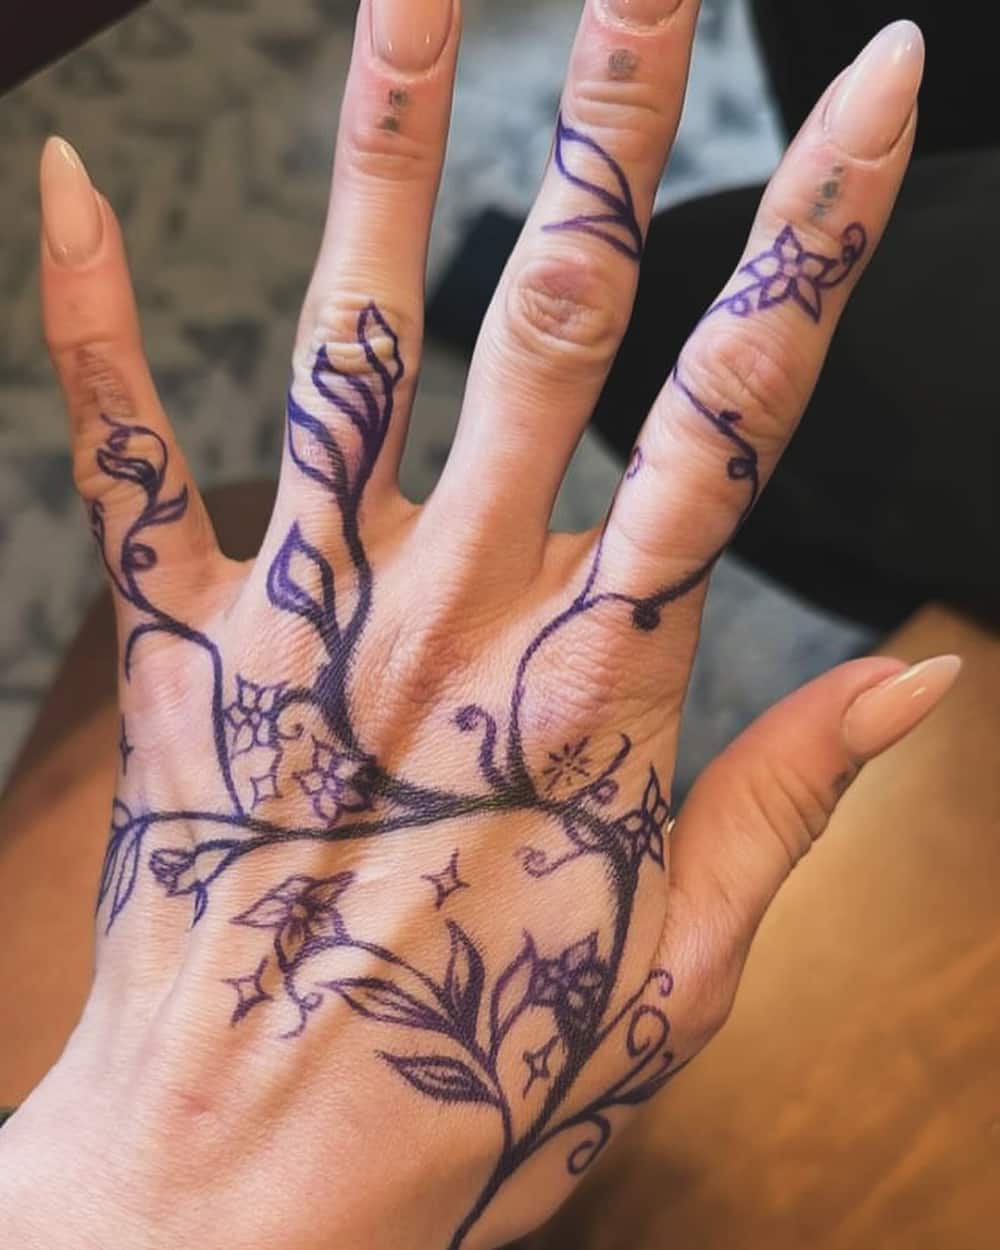 Hand of a woman adorned with purple vine tattoos.